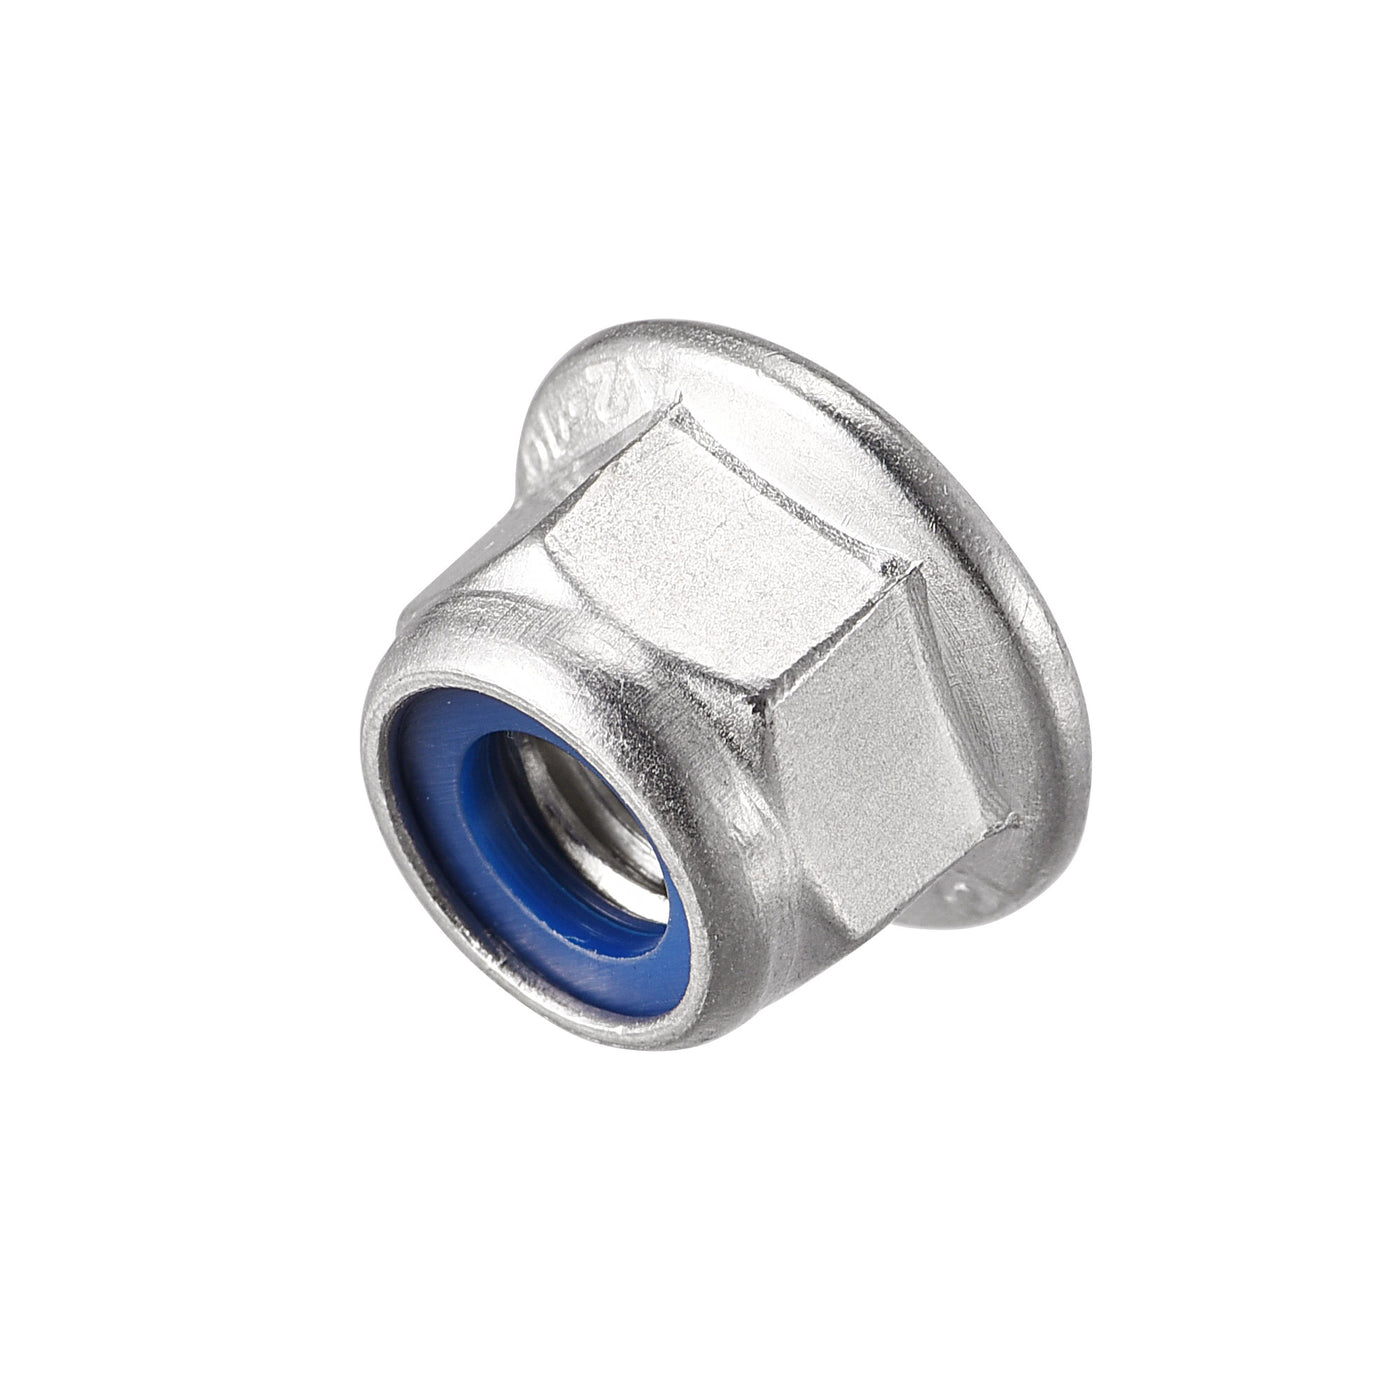 uxcell Uxcell Nylon Insert Hex Lock Nuts with Flange, 304 Stainless Steel for Industrial